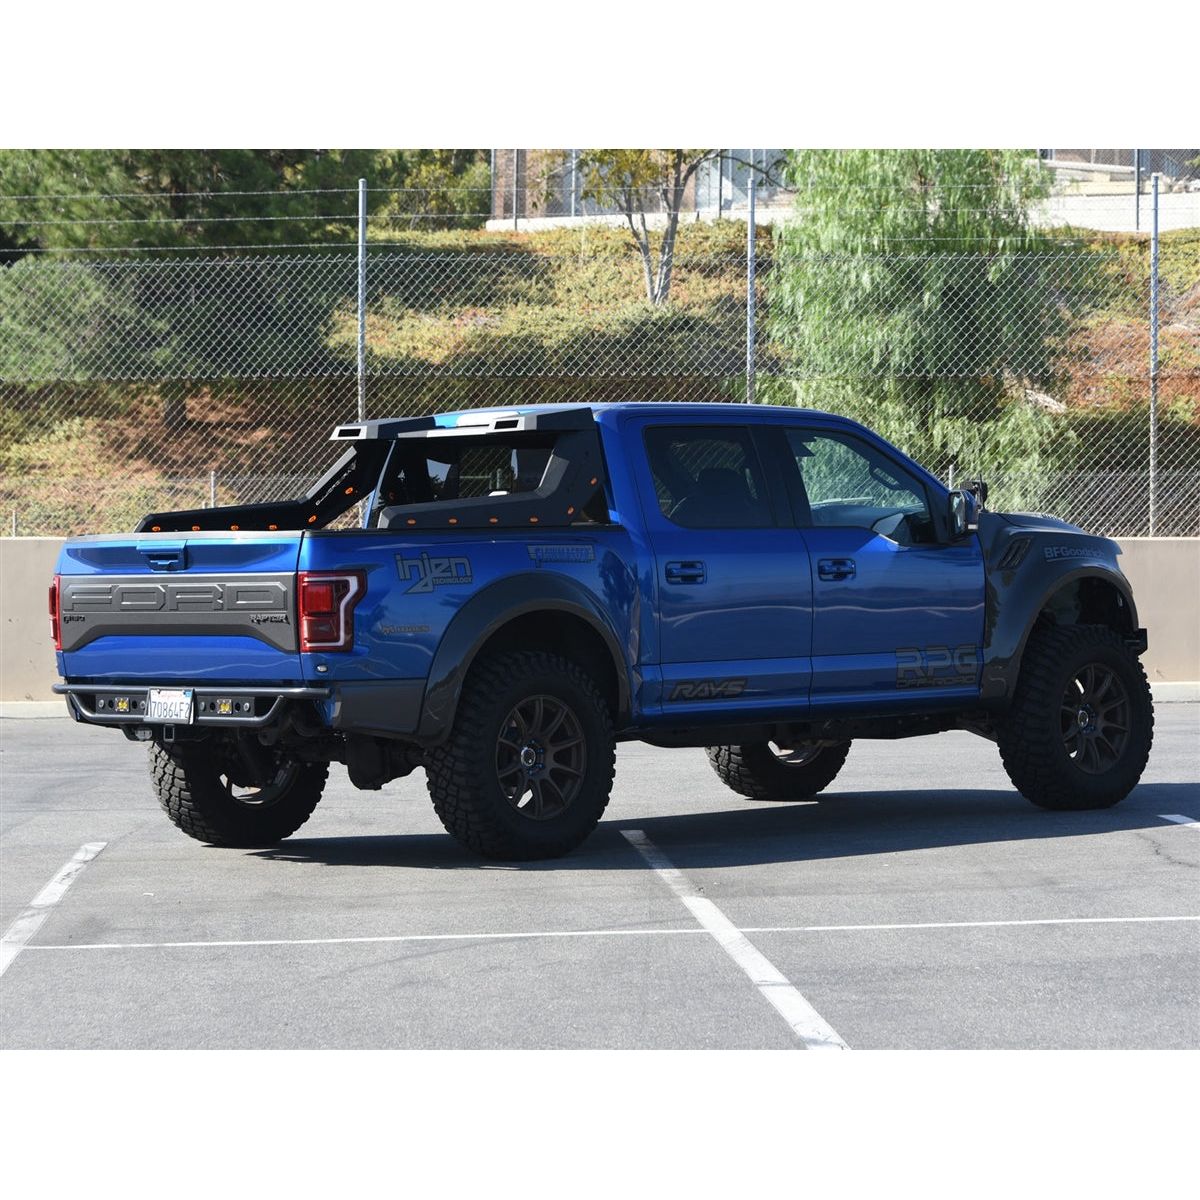 Armordillo Stealth Chase Rack  Fits Full Size Trucks (Excludes all DODGE RAMS, F250-350-450-550) 7161825